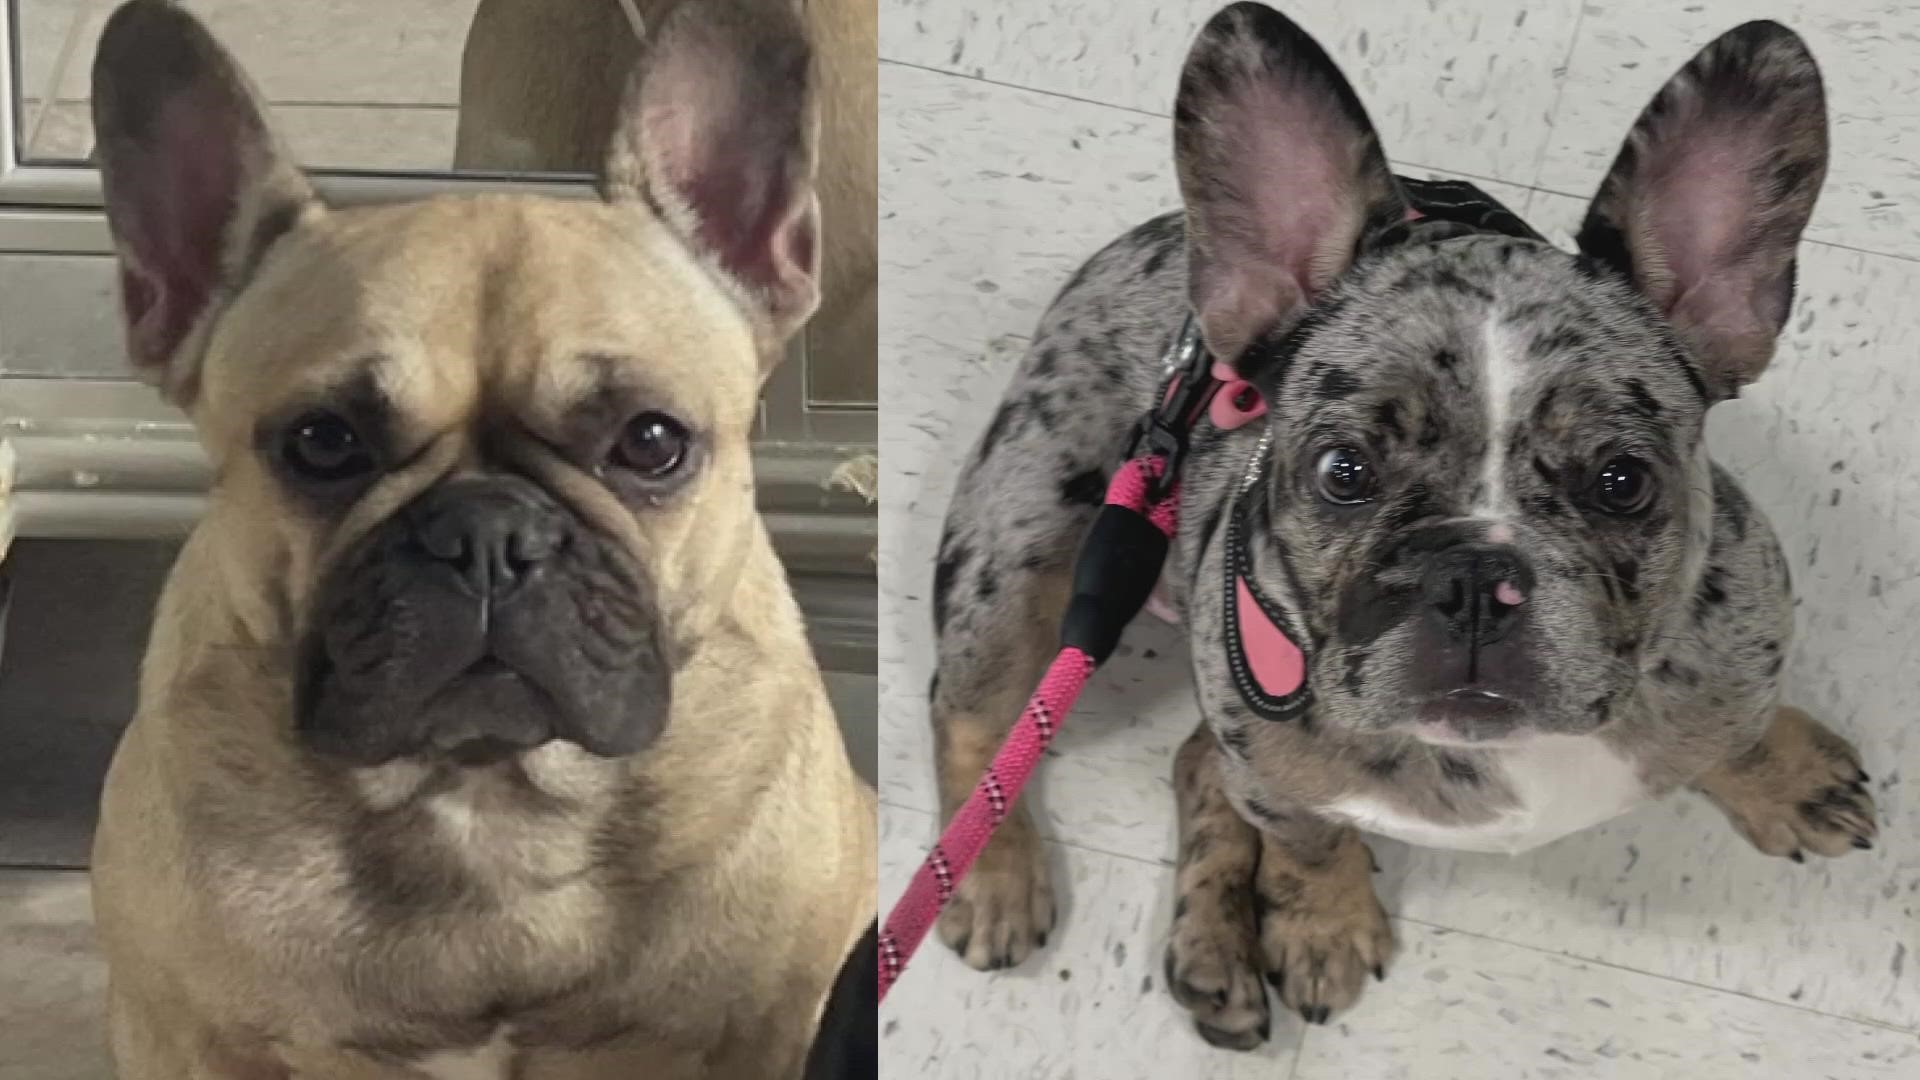 The owner of dogs stolen during a burglary in Valley is pleading for their return